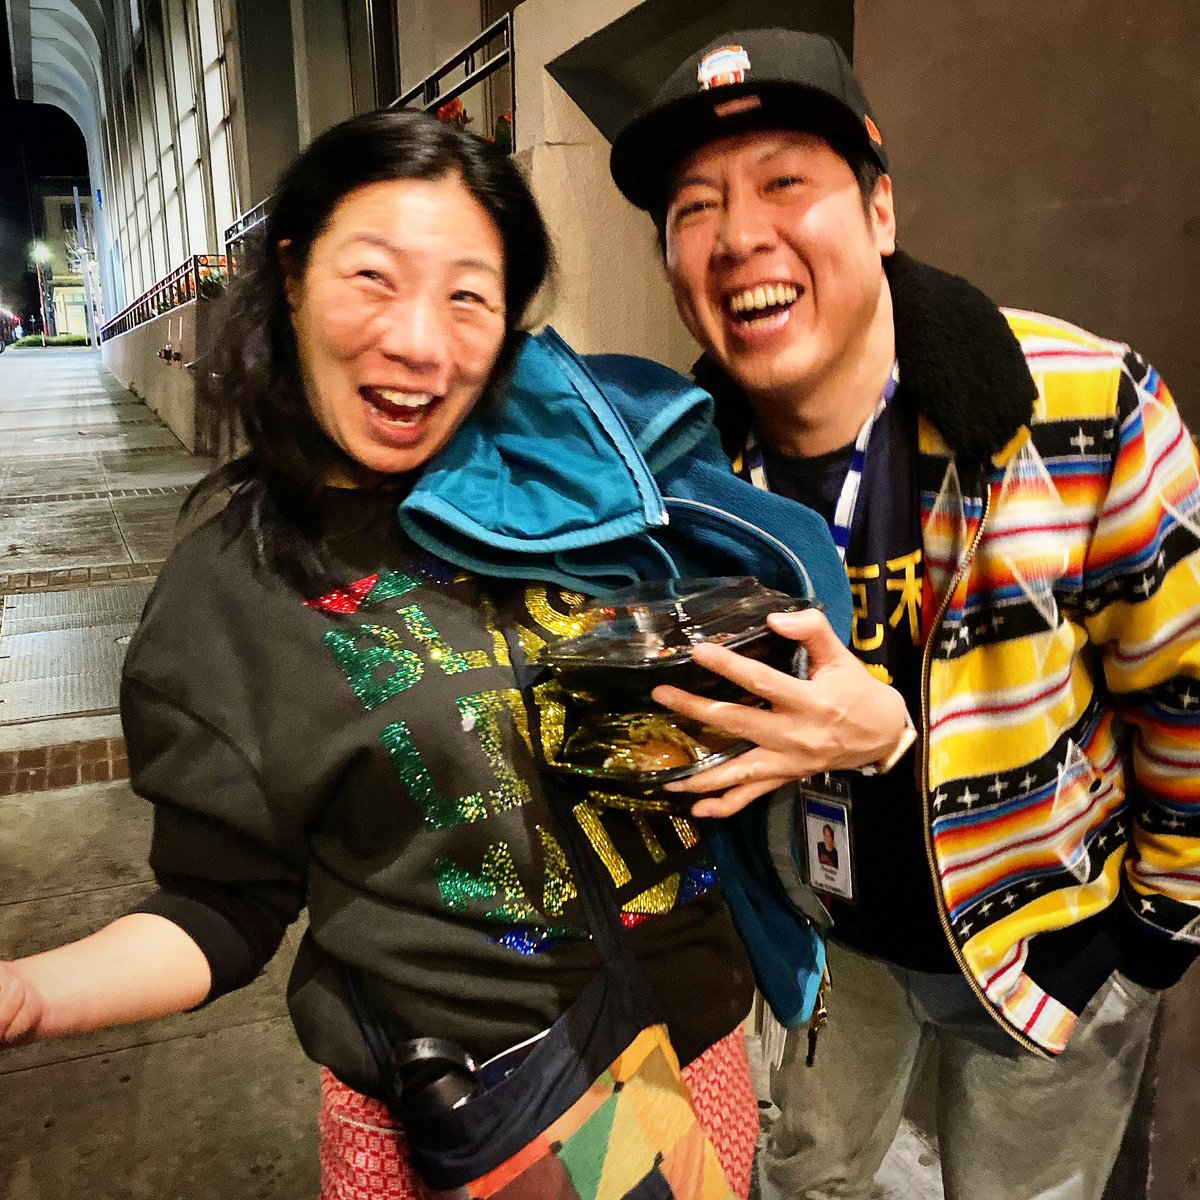 Just two San Francisco kids who came home to work on two Pulitzer Prize Finalist plays. See #TheFarCountry at @berkeleyrep until April 14 and @mskristinawong in #KristinaWongSweatshopOverlord at @ACTSanFrancisco until May 5! #LiveTheater #AsianExcellence #RepresentationMatters